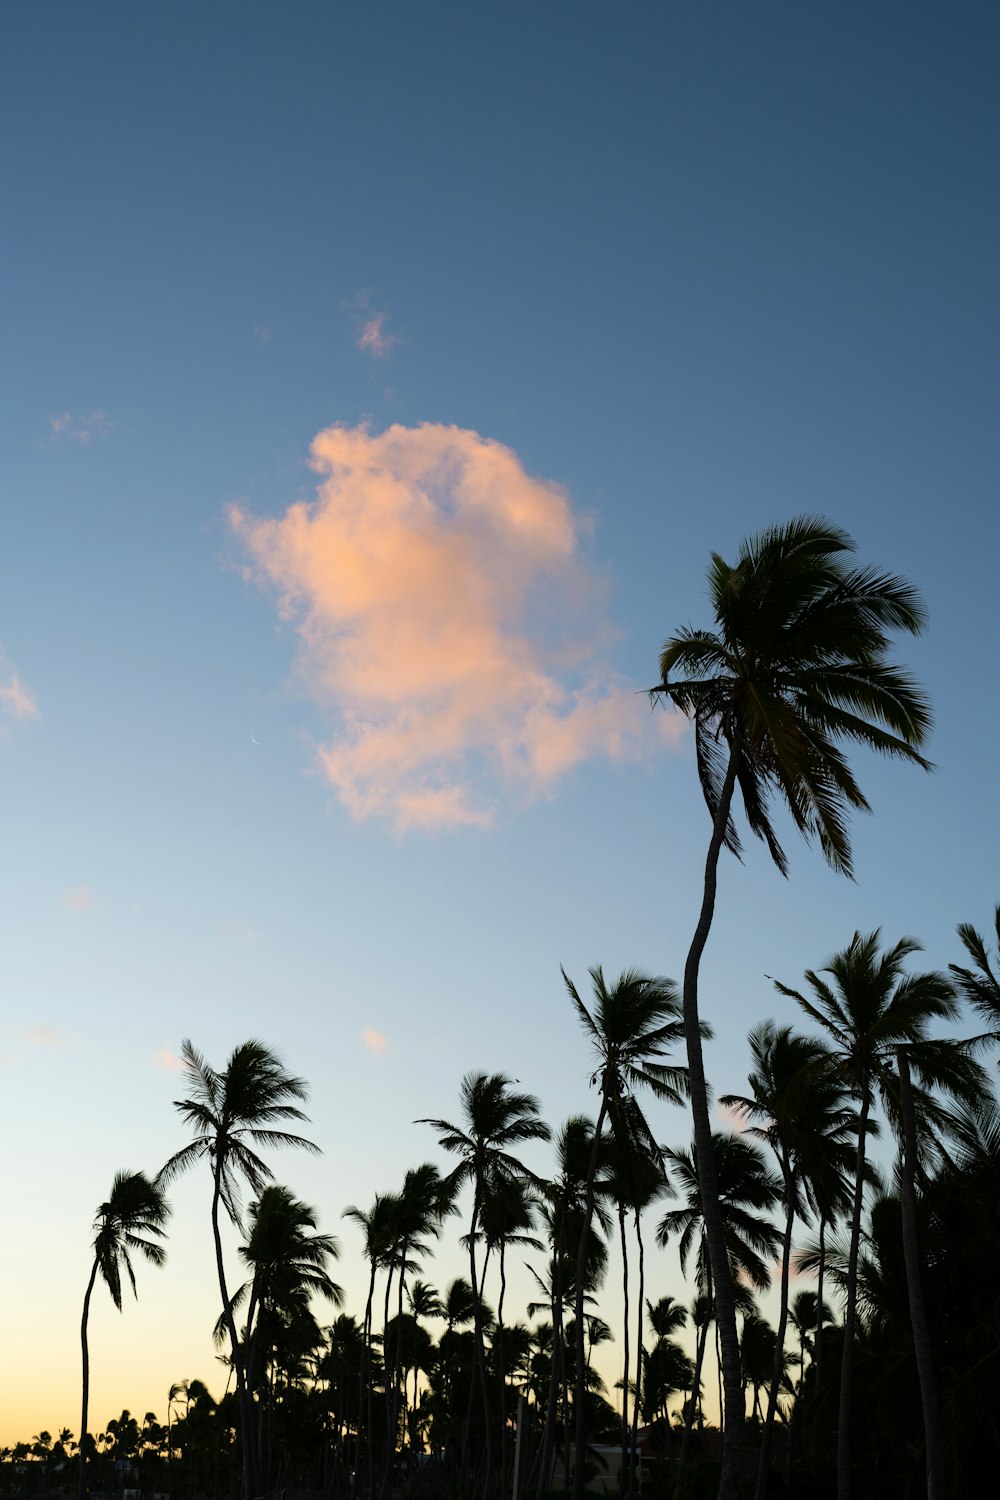 a group of palm trees with a pink cloud in the sky